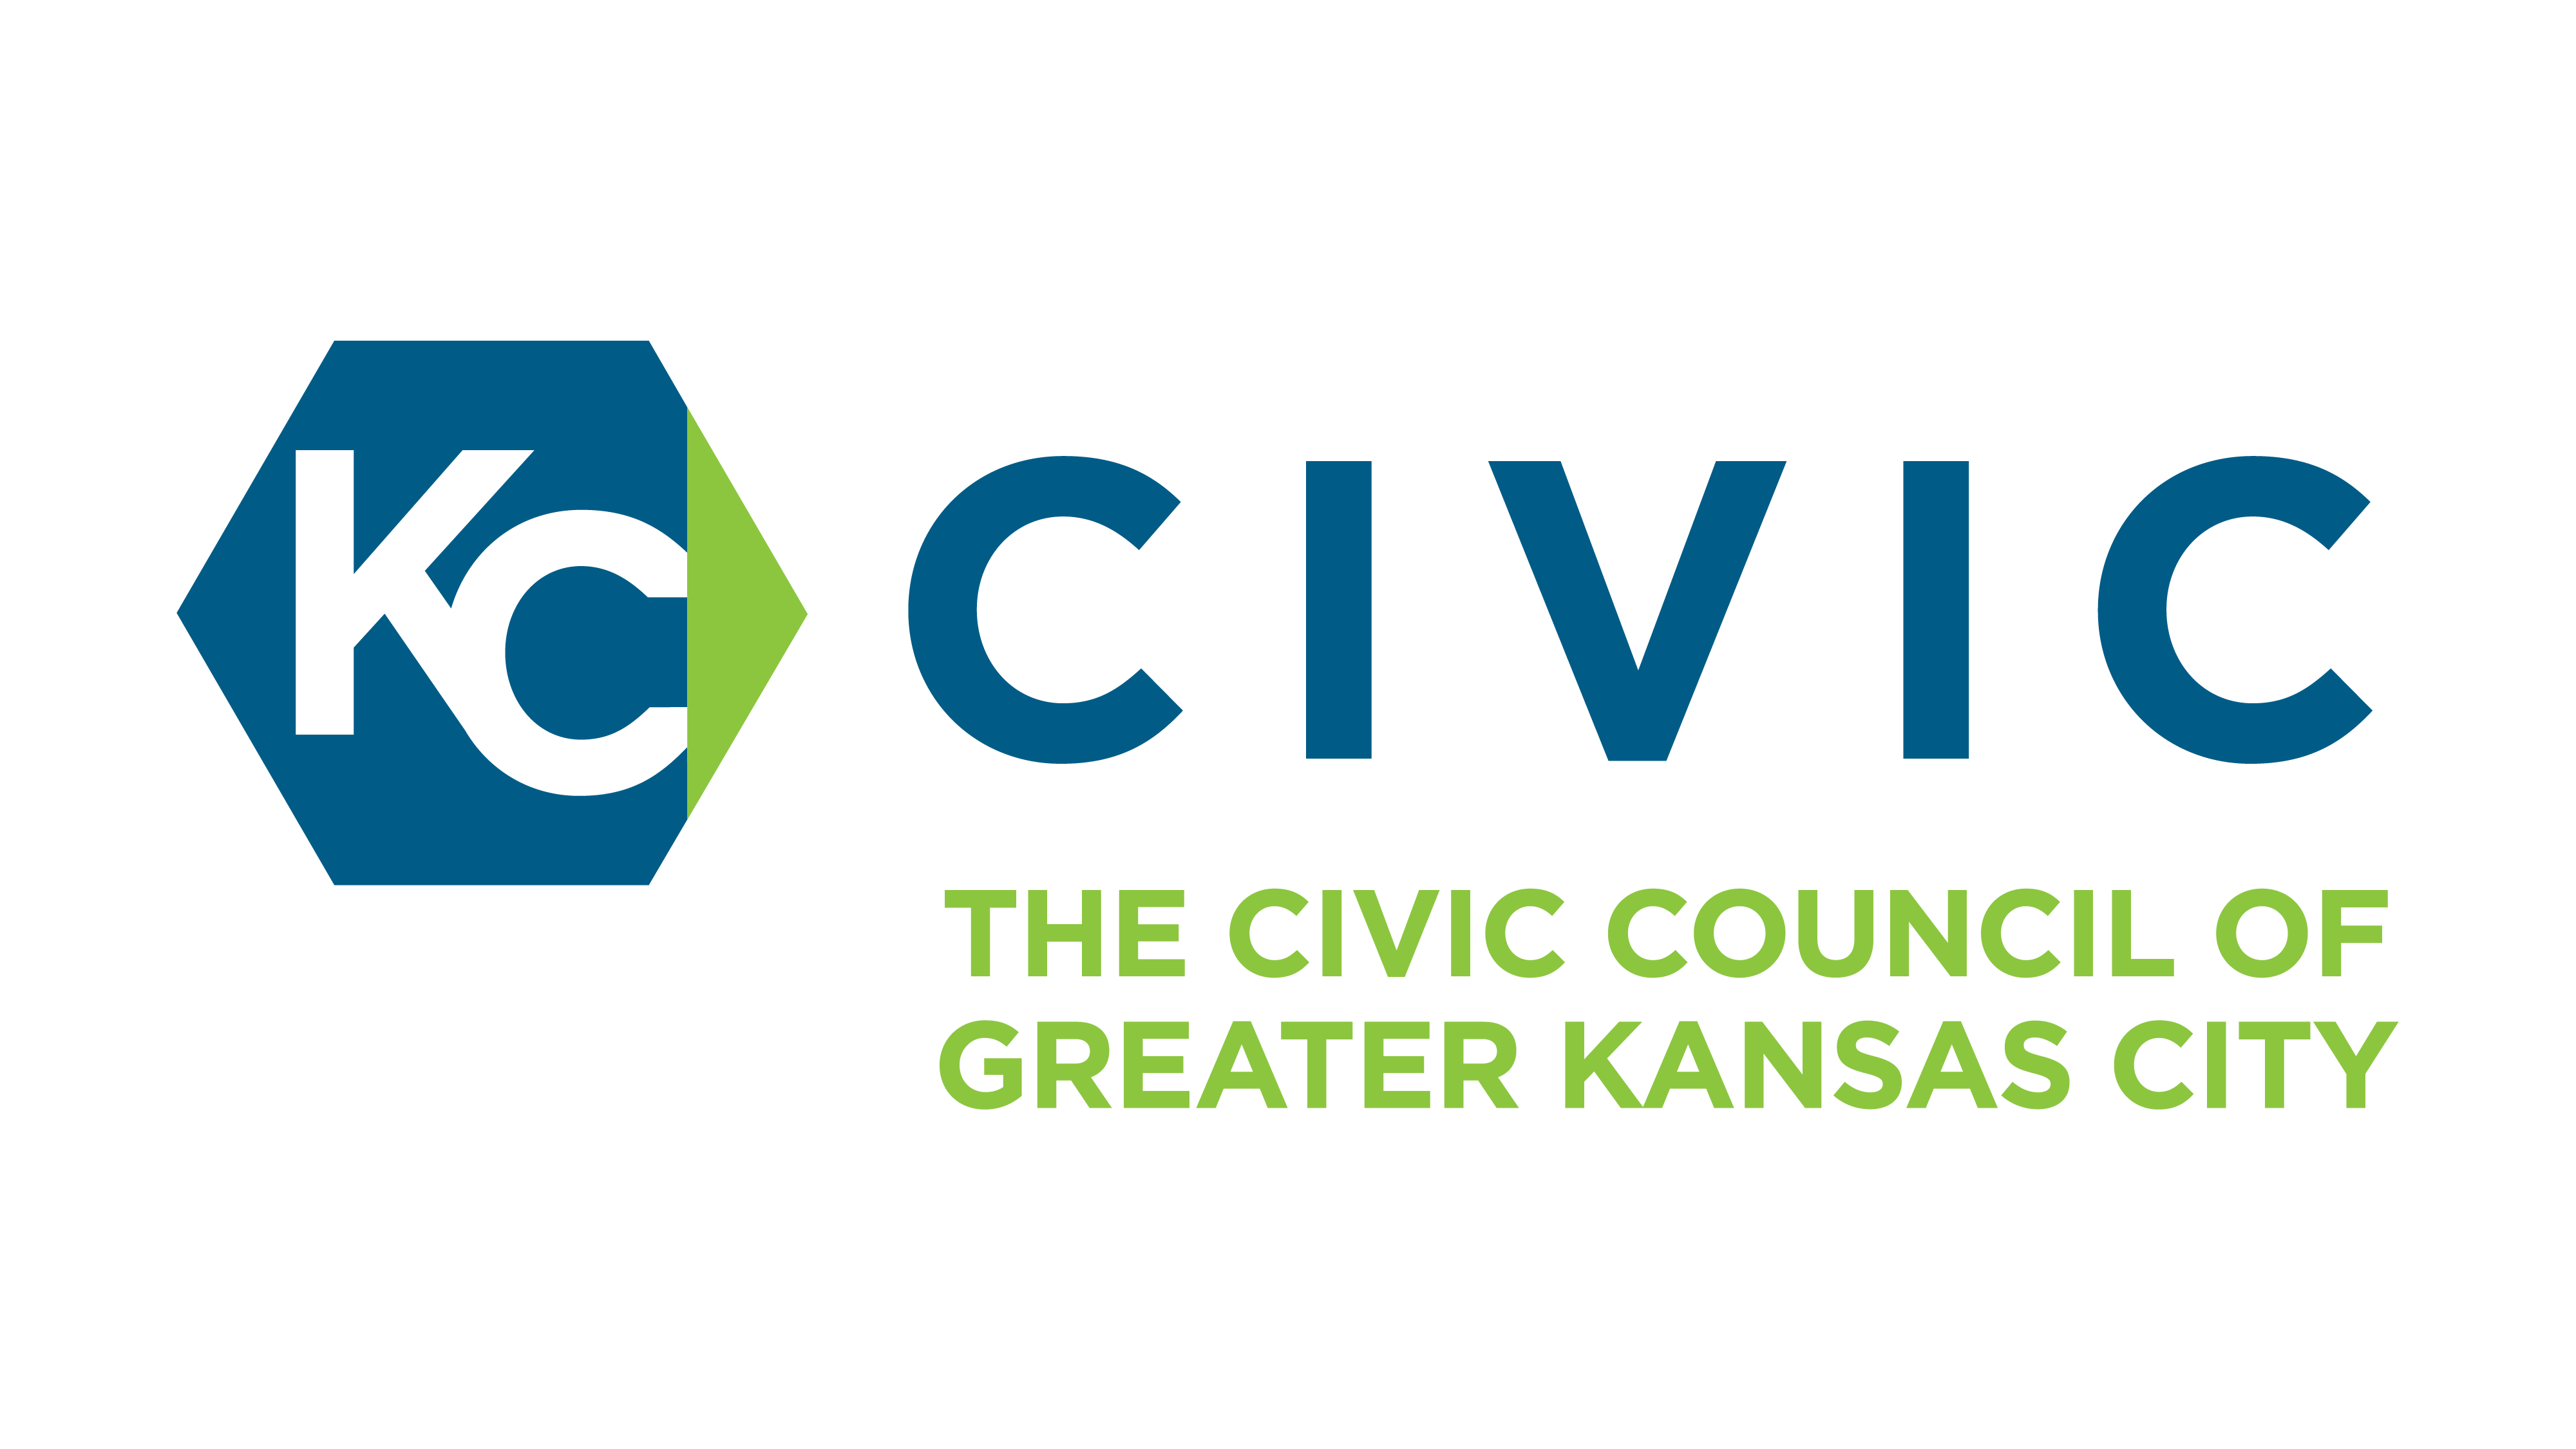 The Civic Council of Greater Kansas City logo